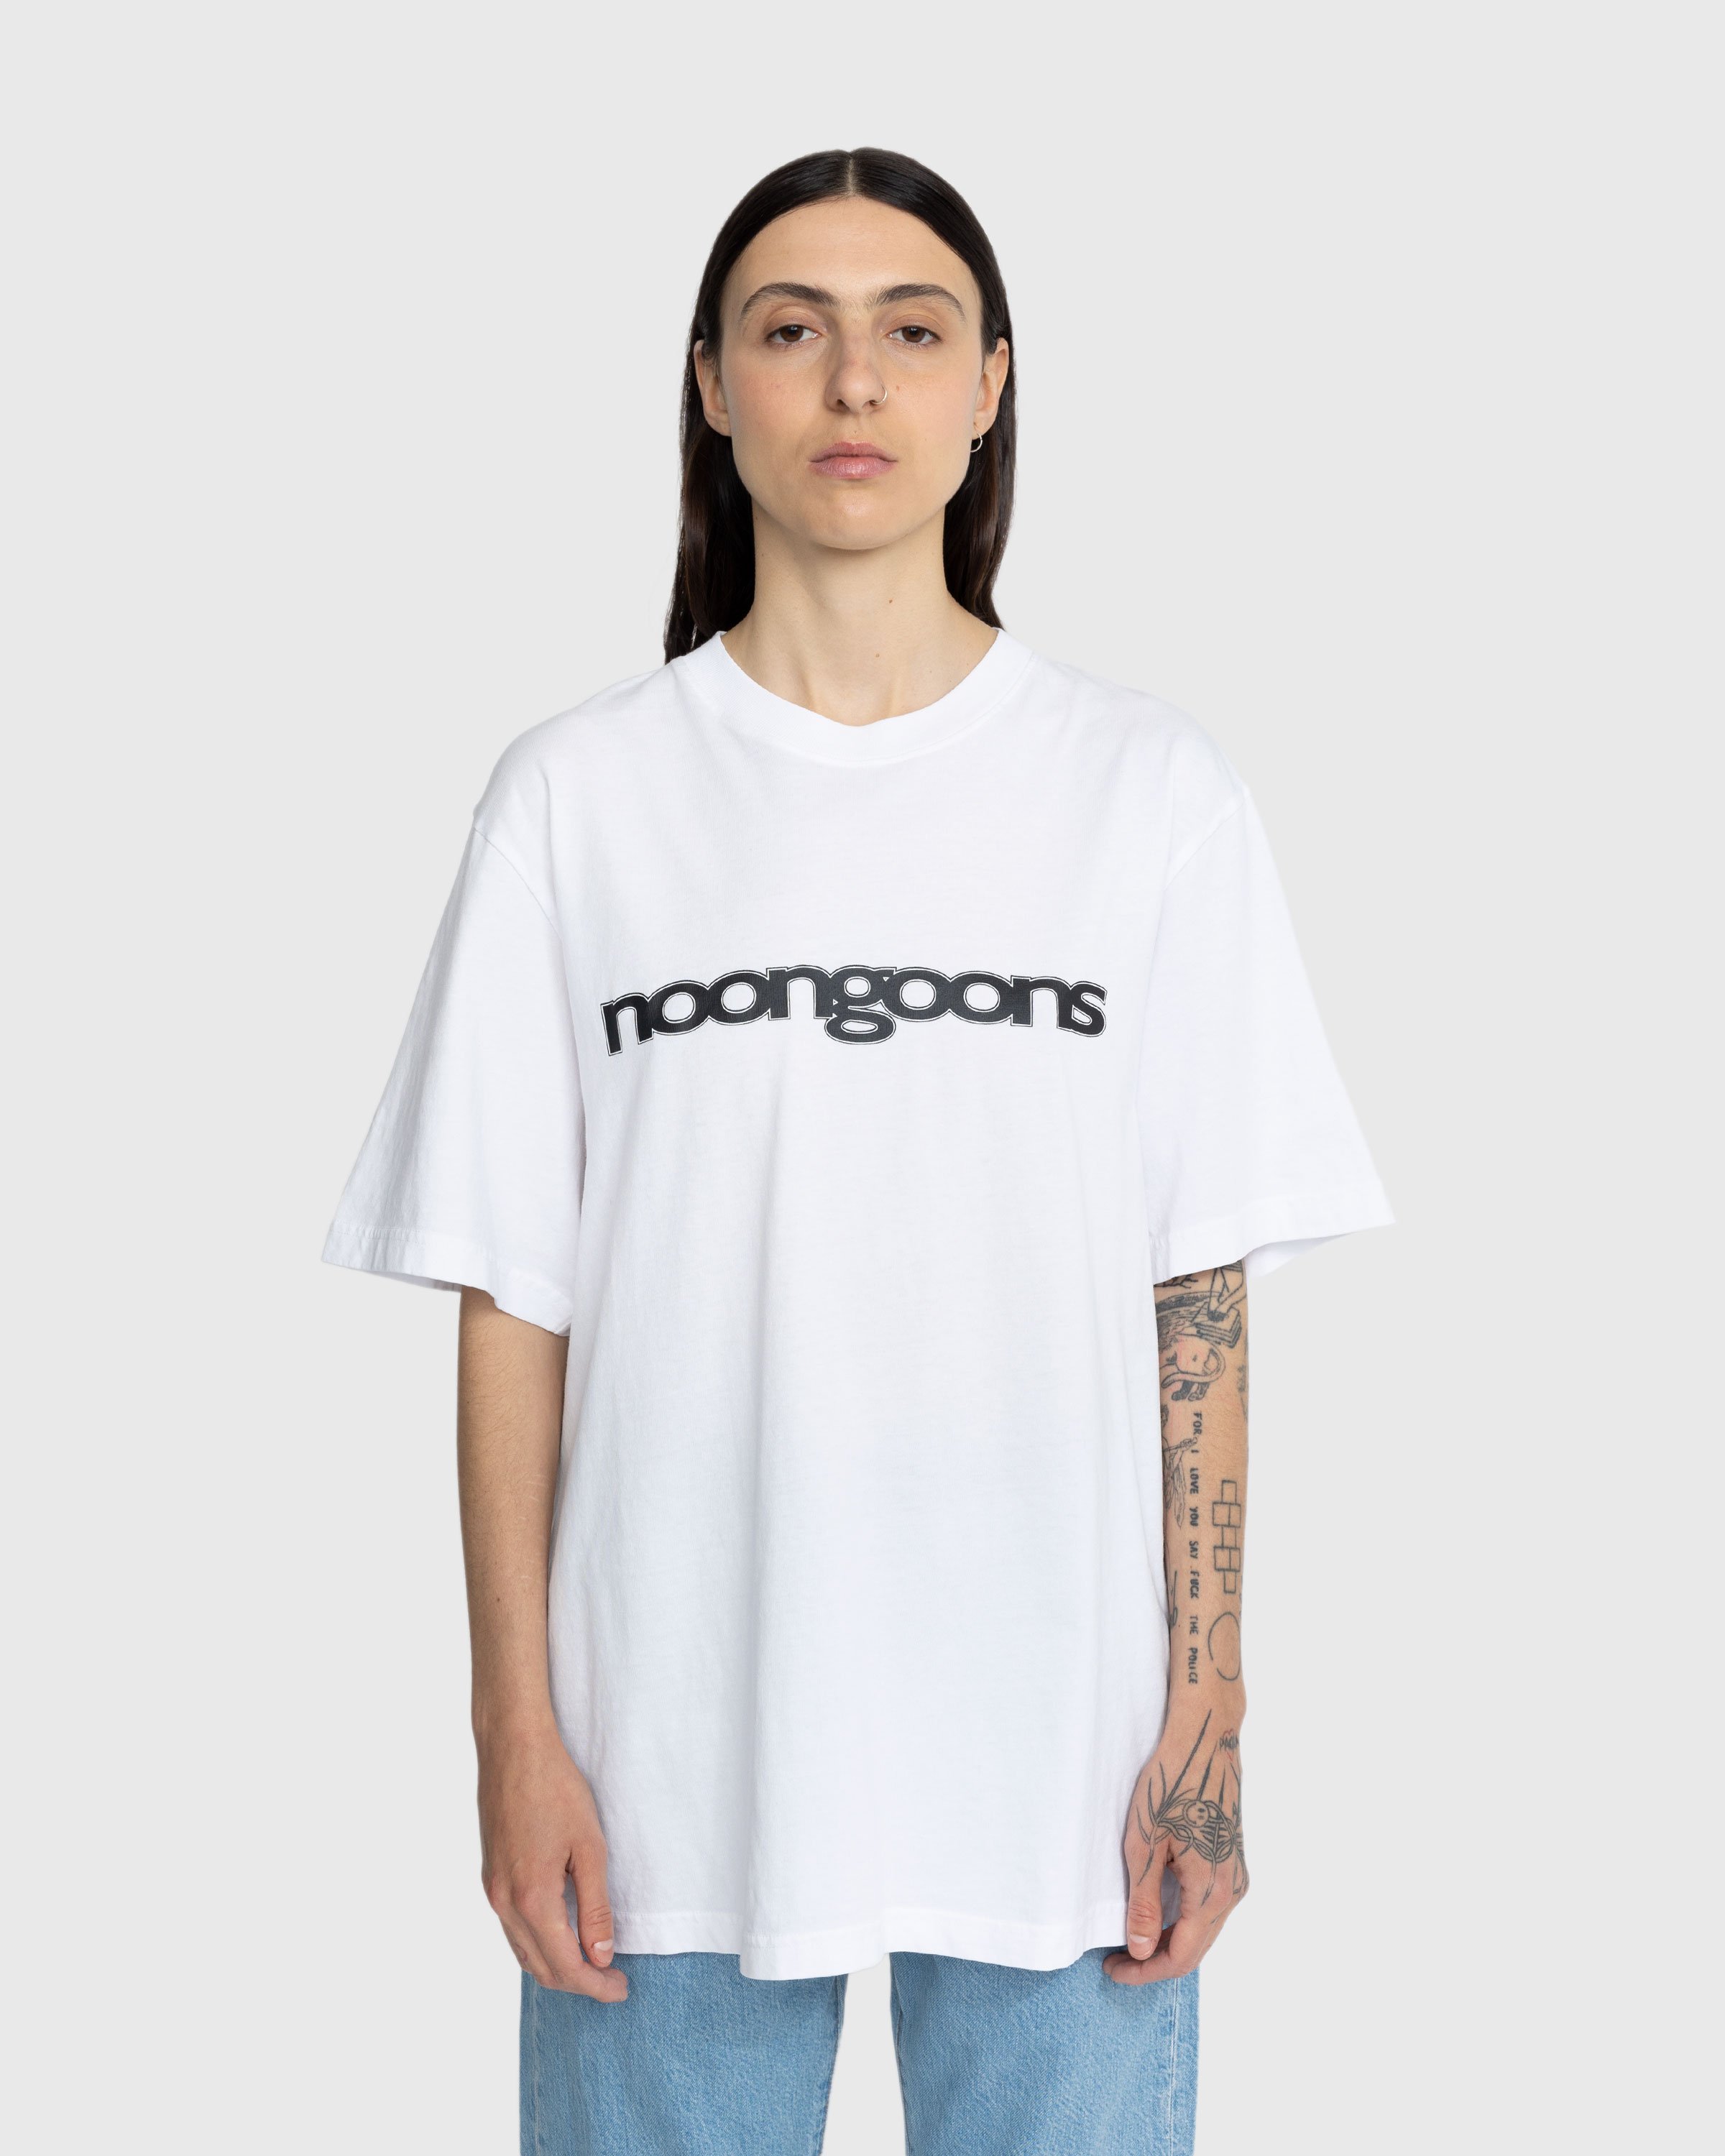 Noon Goons - Very Simple T-Shirt White - Clothing - White - Image 2